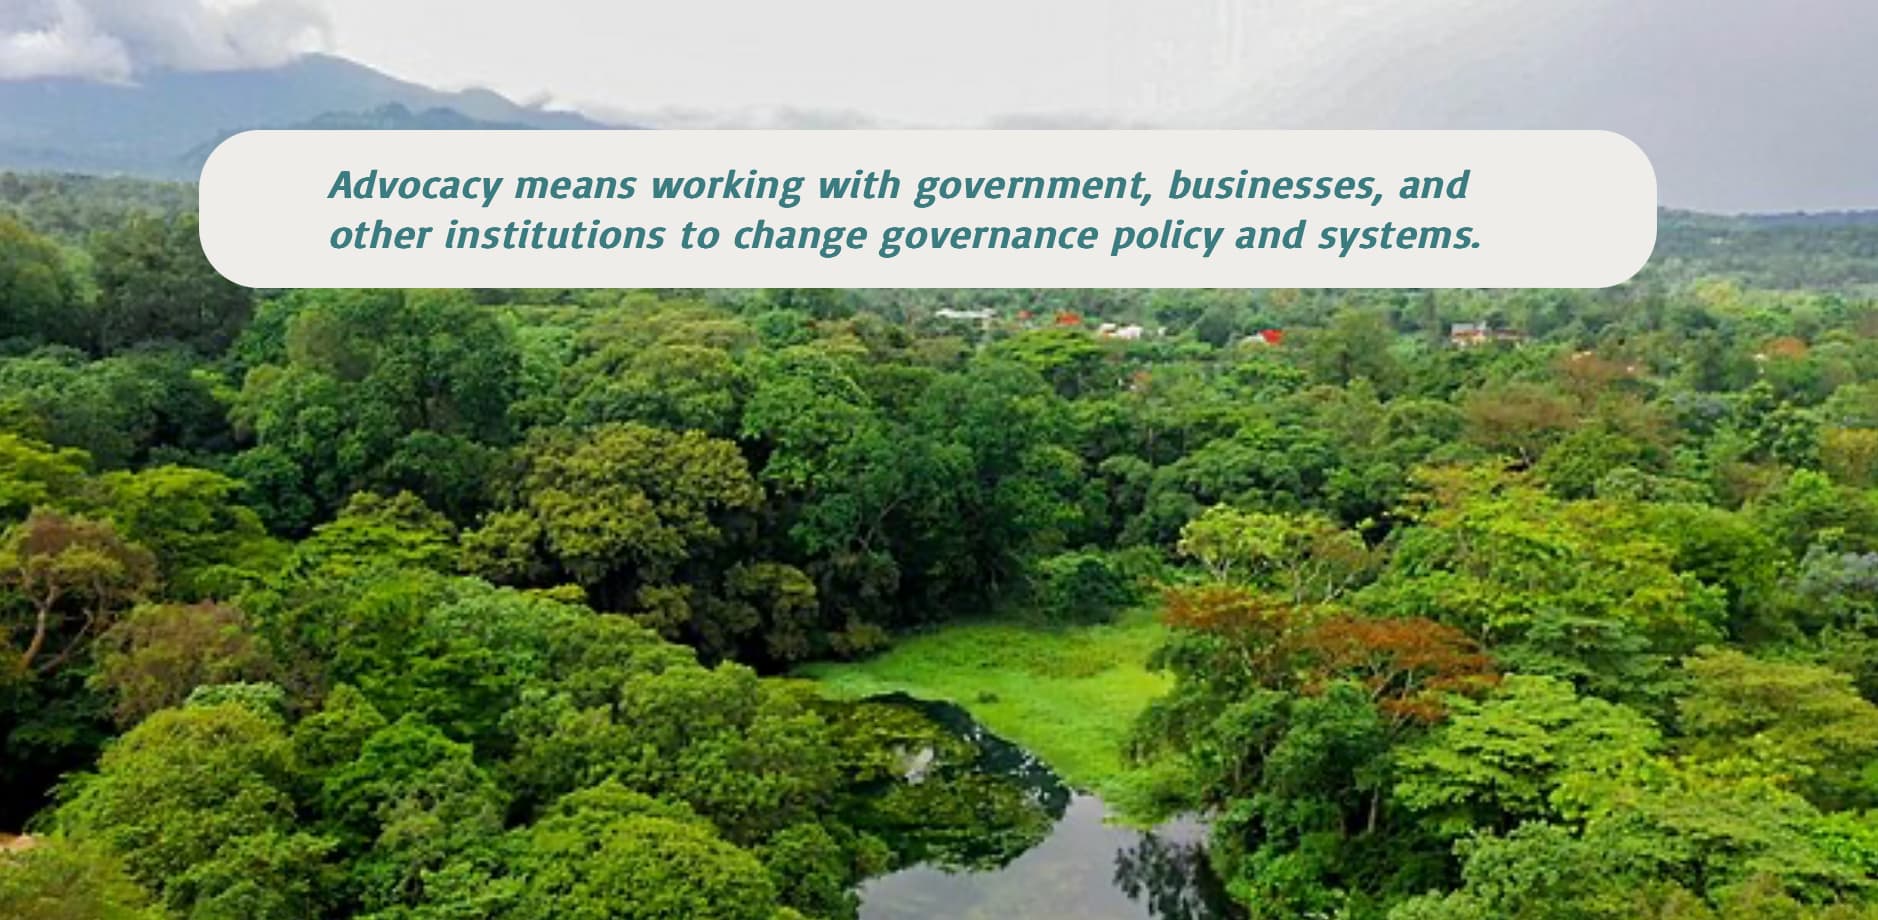 Background photo of a mountain range and forest. A quote overlay near the top says, "Advocacy means working with government, businesses, and other institutions to change governance policy and systems."